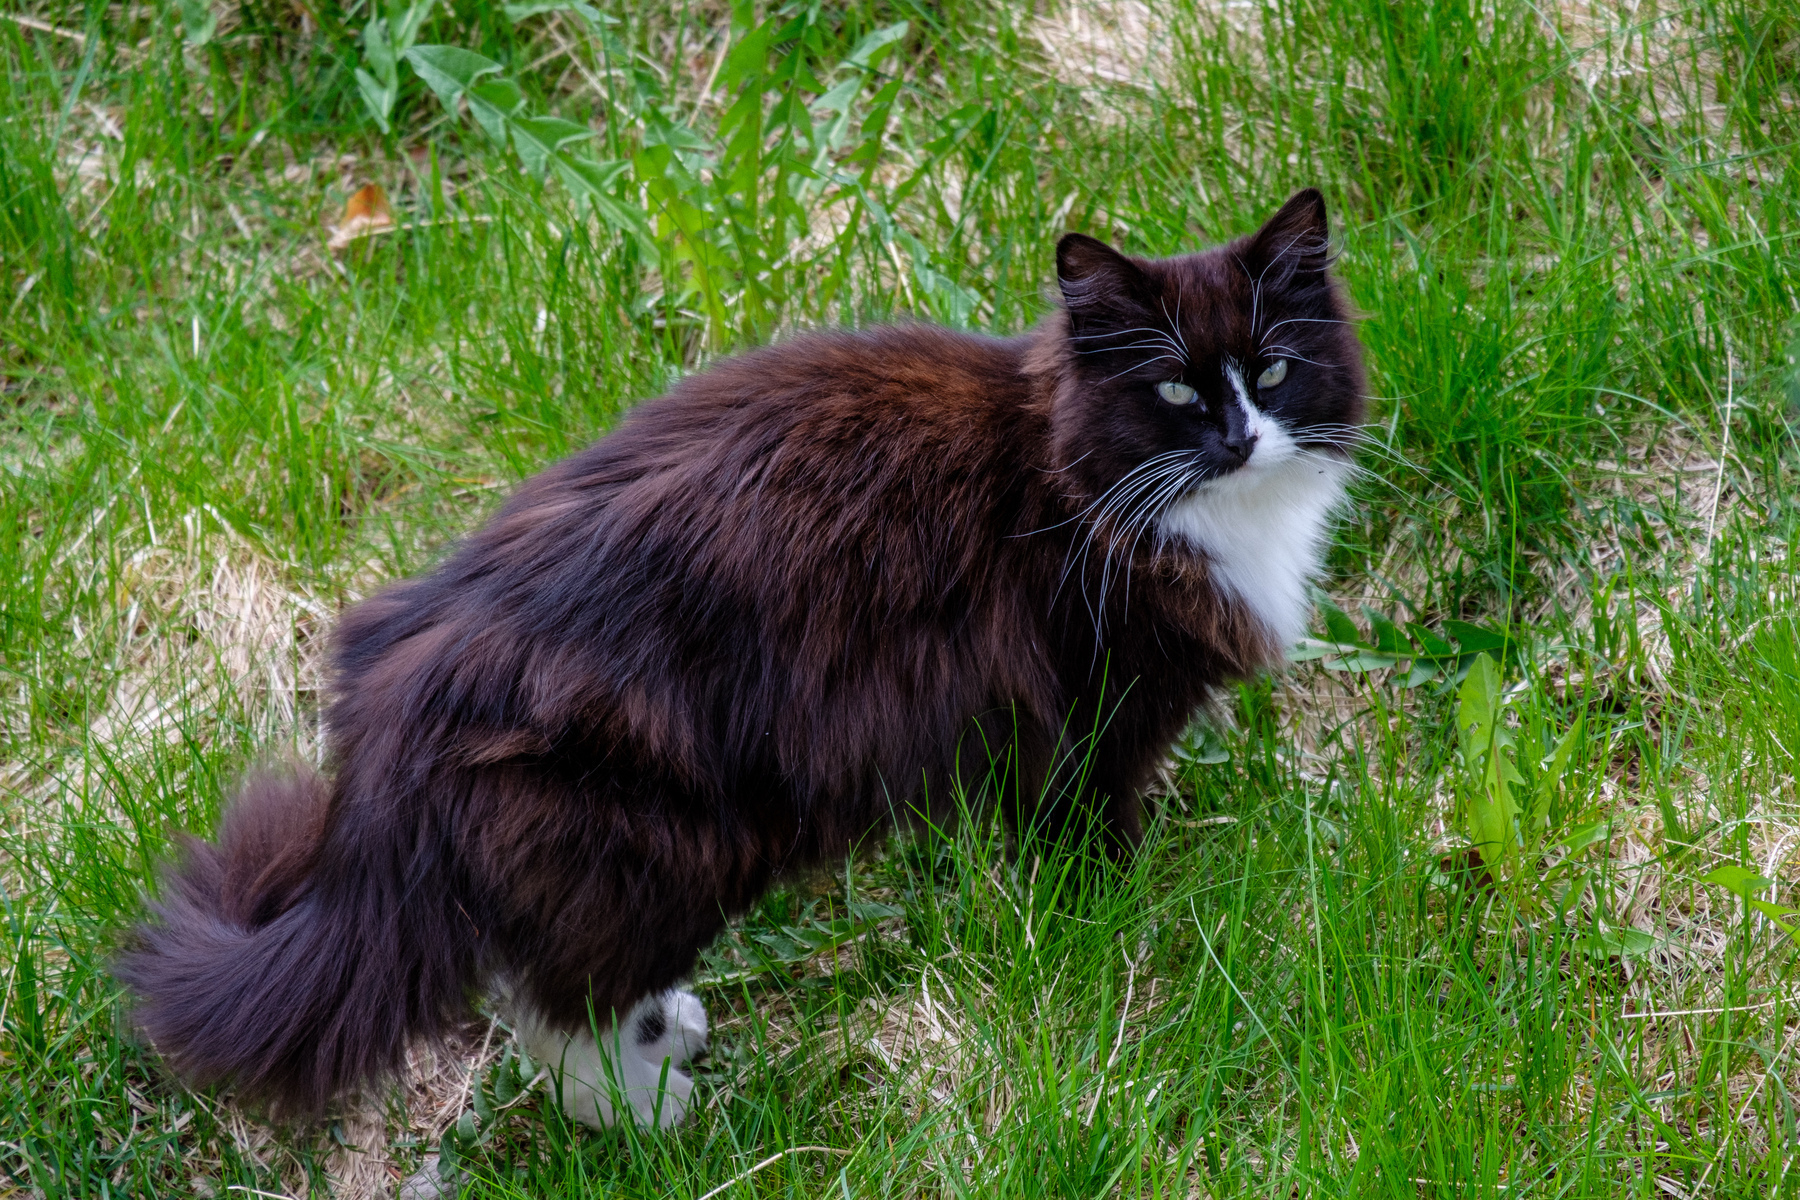 Neighbour, a black and white “tuxedo” pattern cat, walking through some overgrown grass